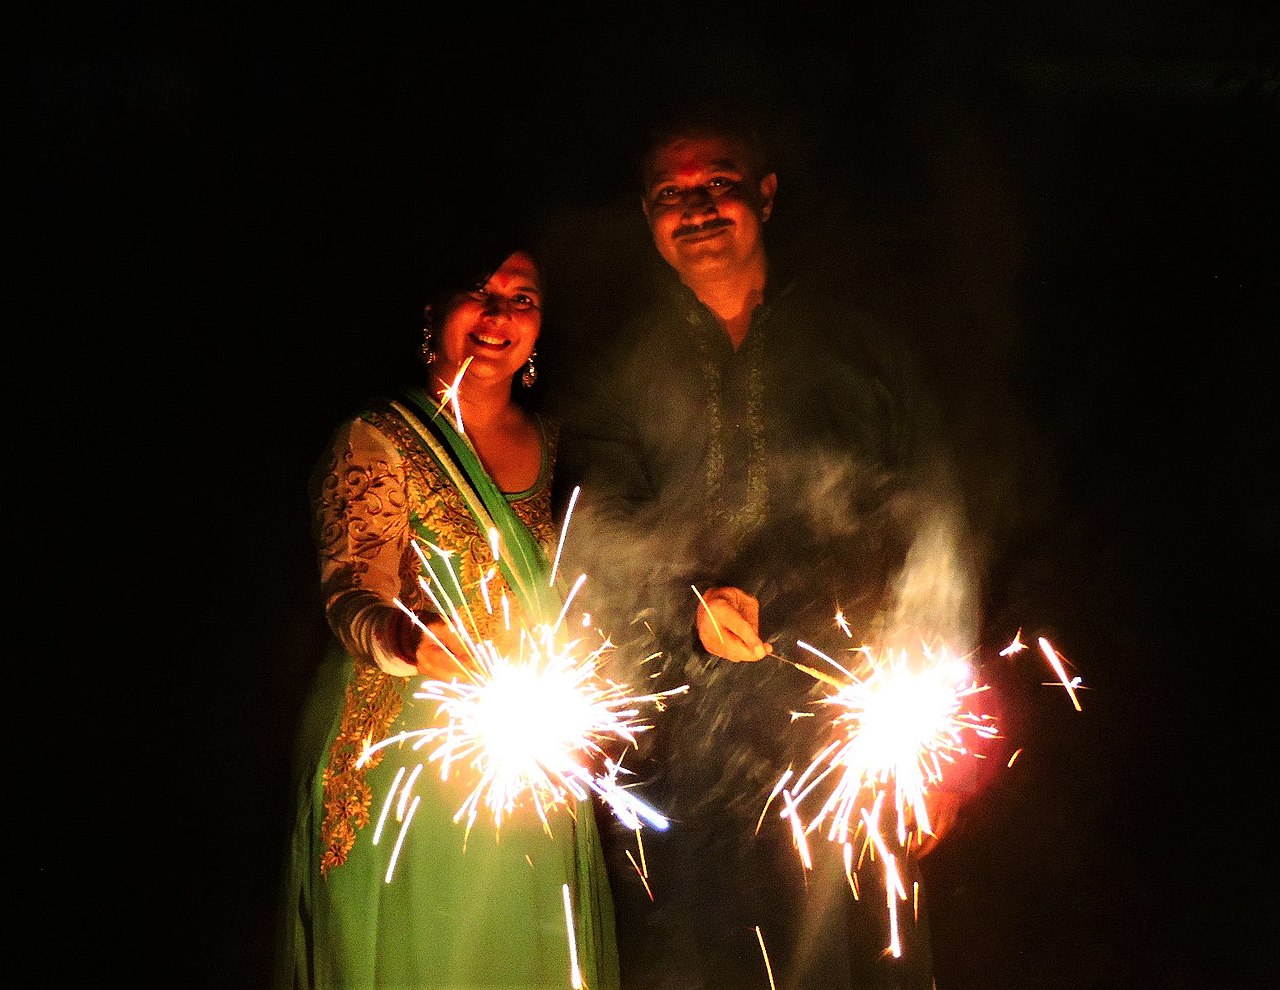 The Mystery Behind Diwali In Trinidad Festival Of Lights